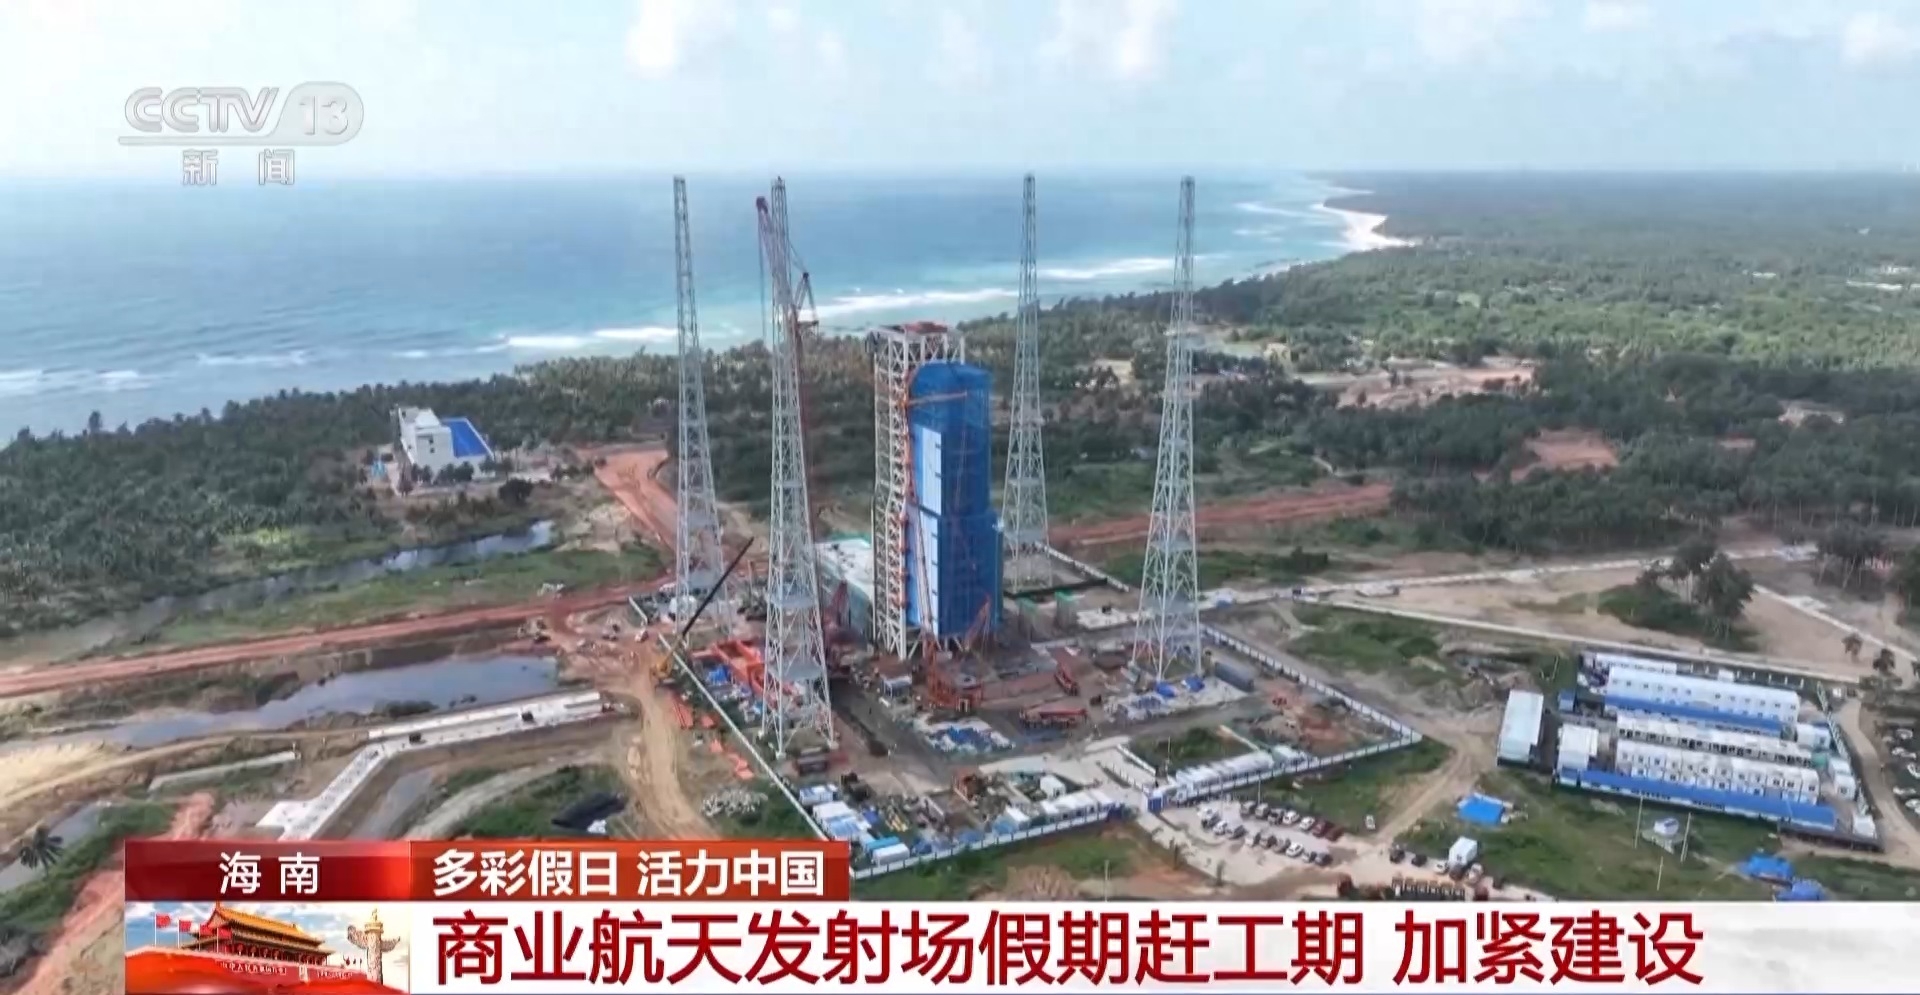 Seize the Construction Period, Hainan Commercial Space Launch Site Will Not Stop Work During Holidays